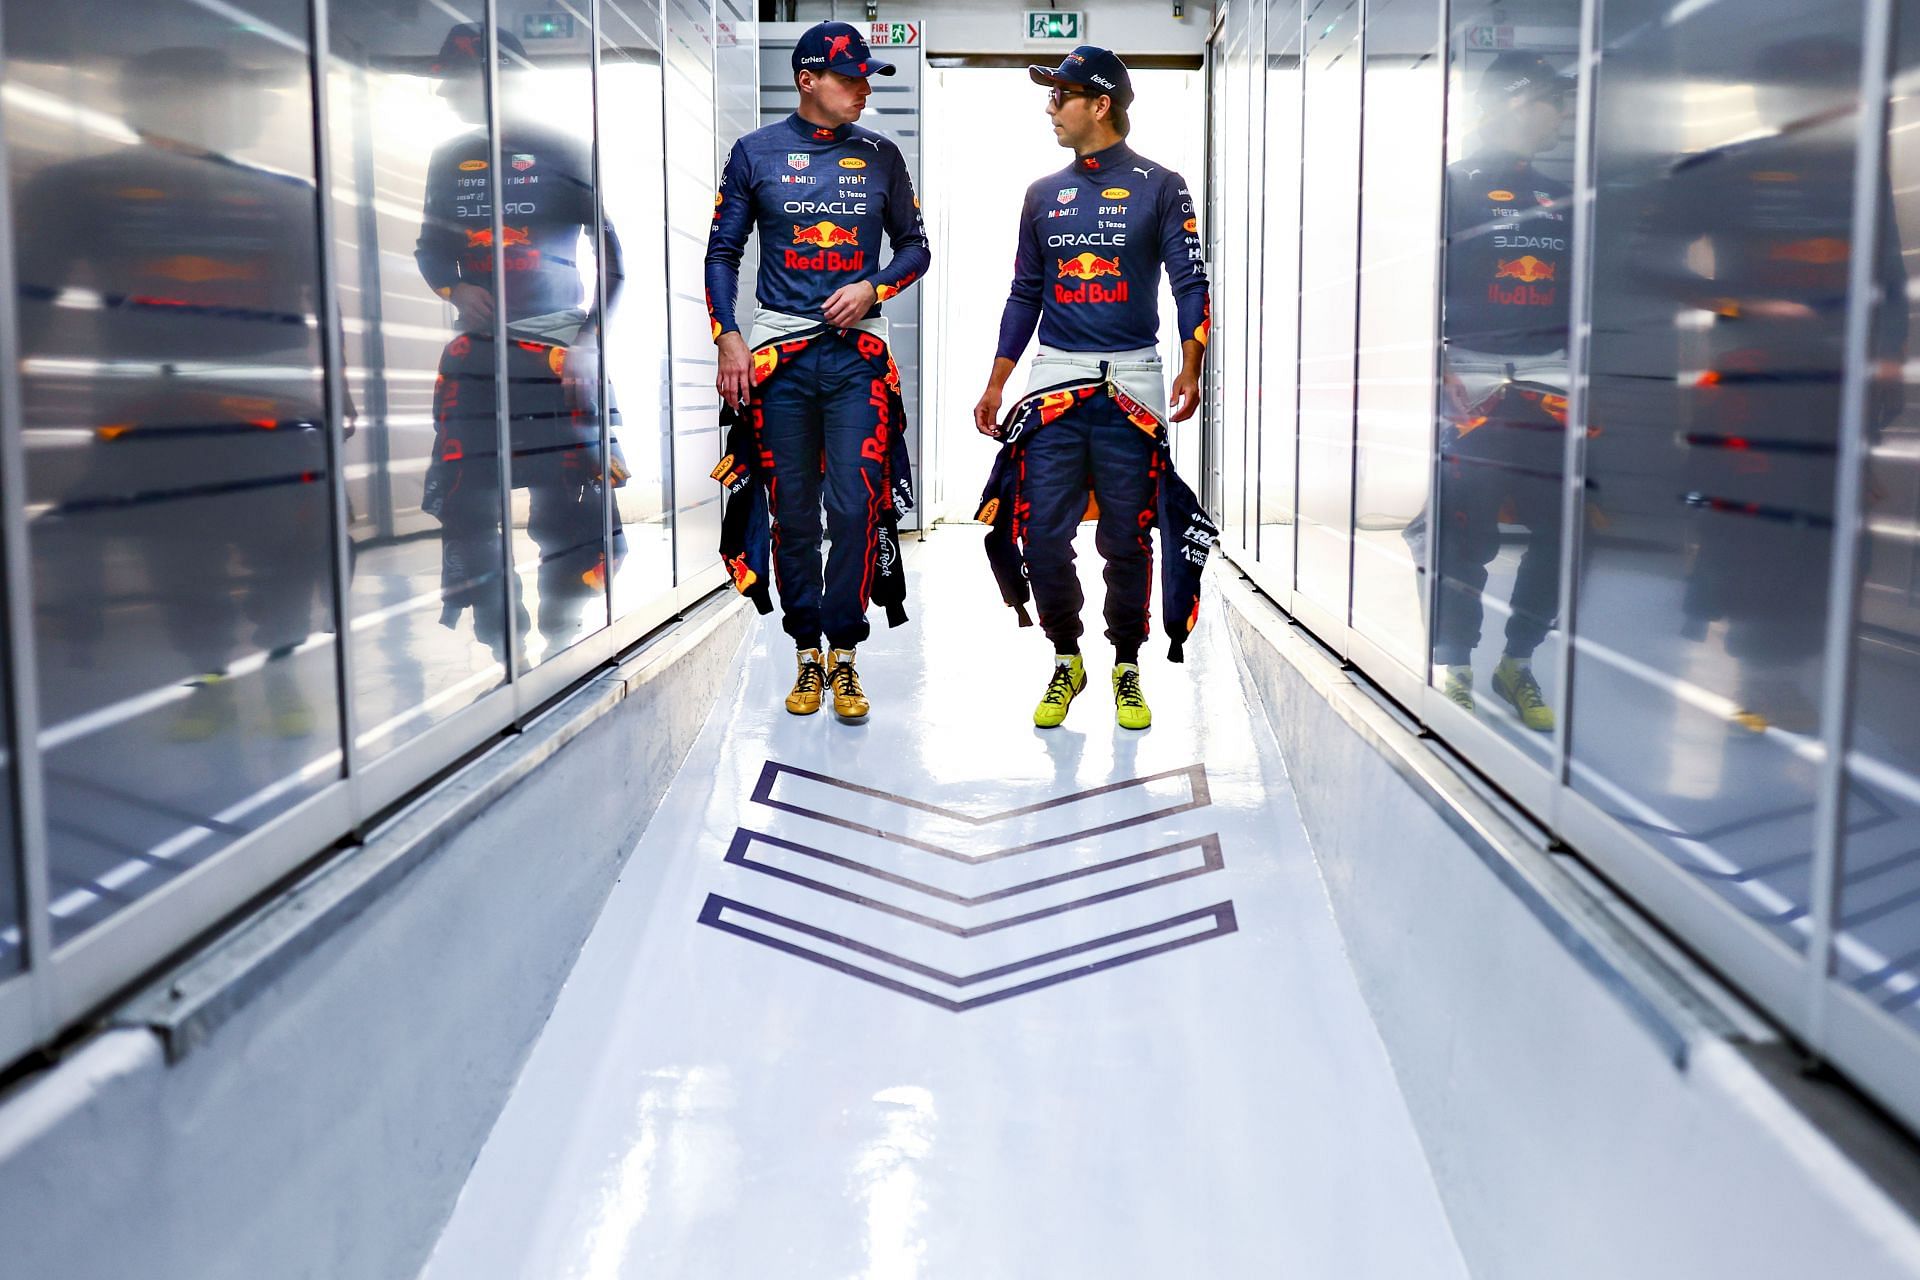 Red Bull drivers Max Verstappen (left) and Sergio Perez (right) walk in the team garage during the 2022 F1 French GP weekend. (Photo by Mark Thompson/Getty Images)